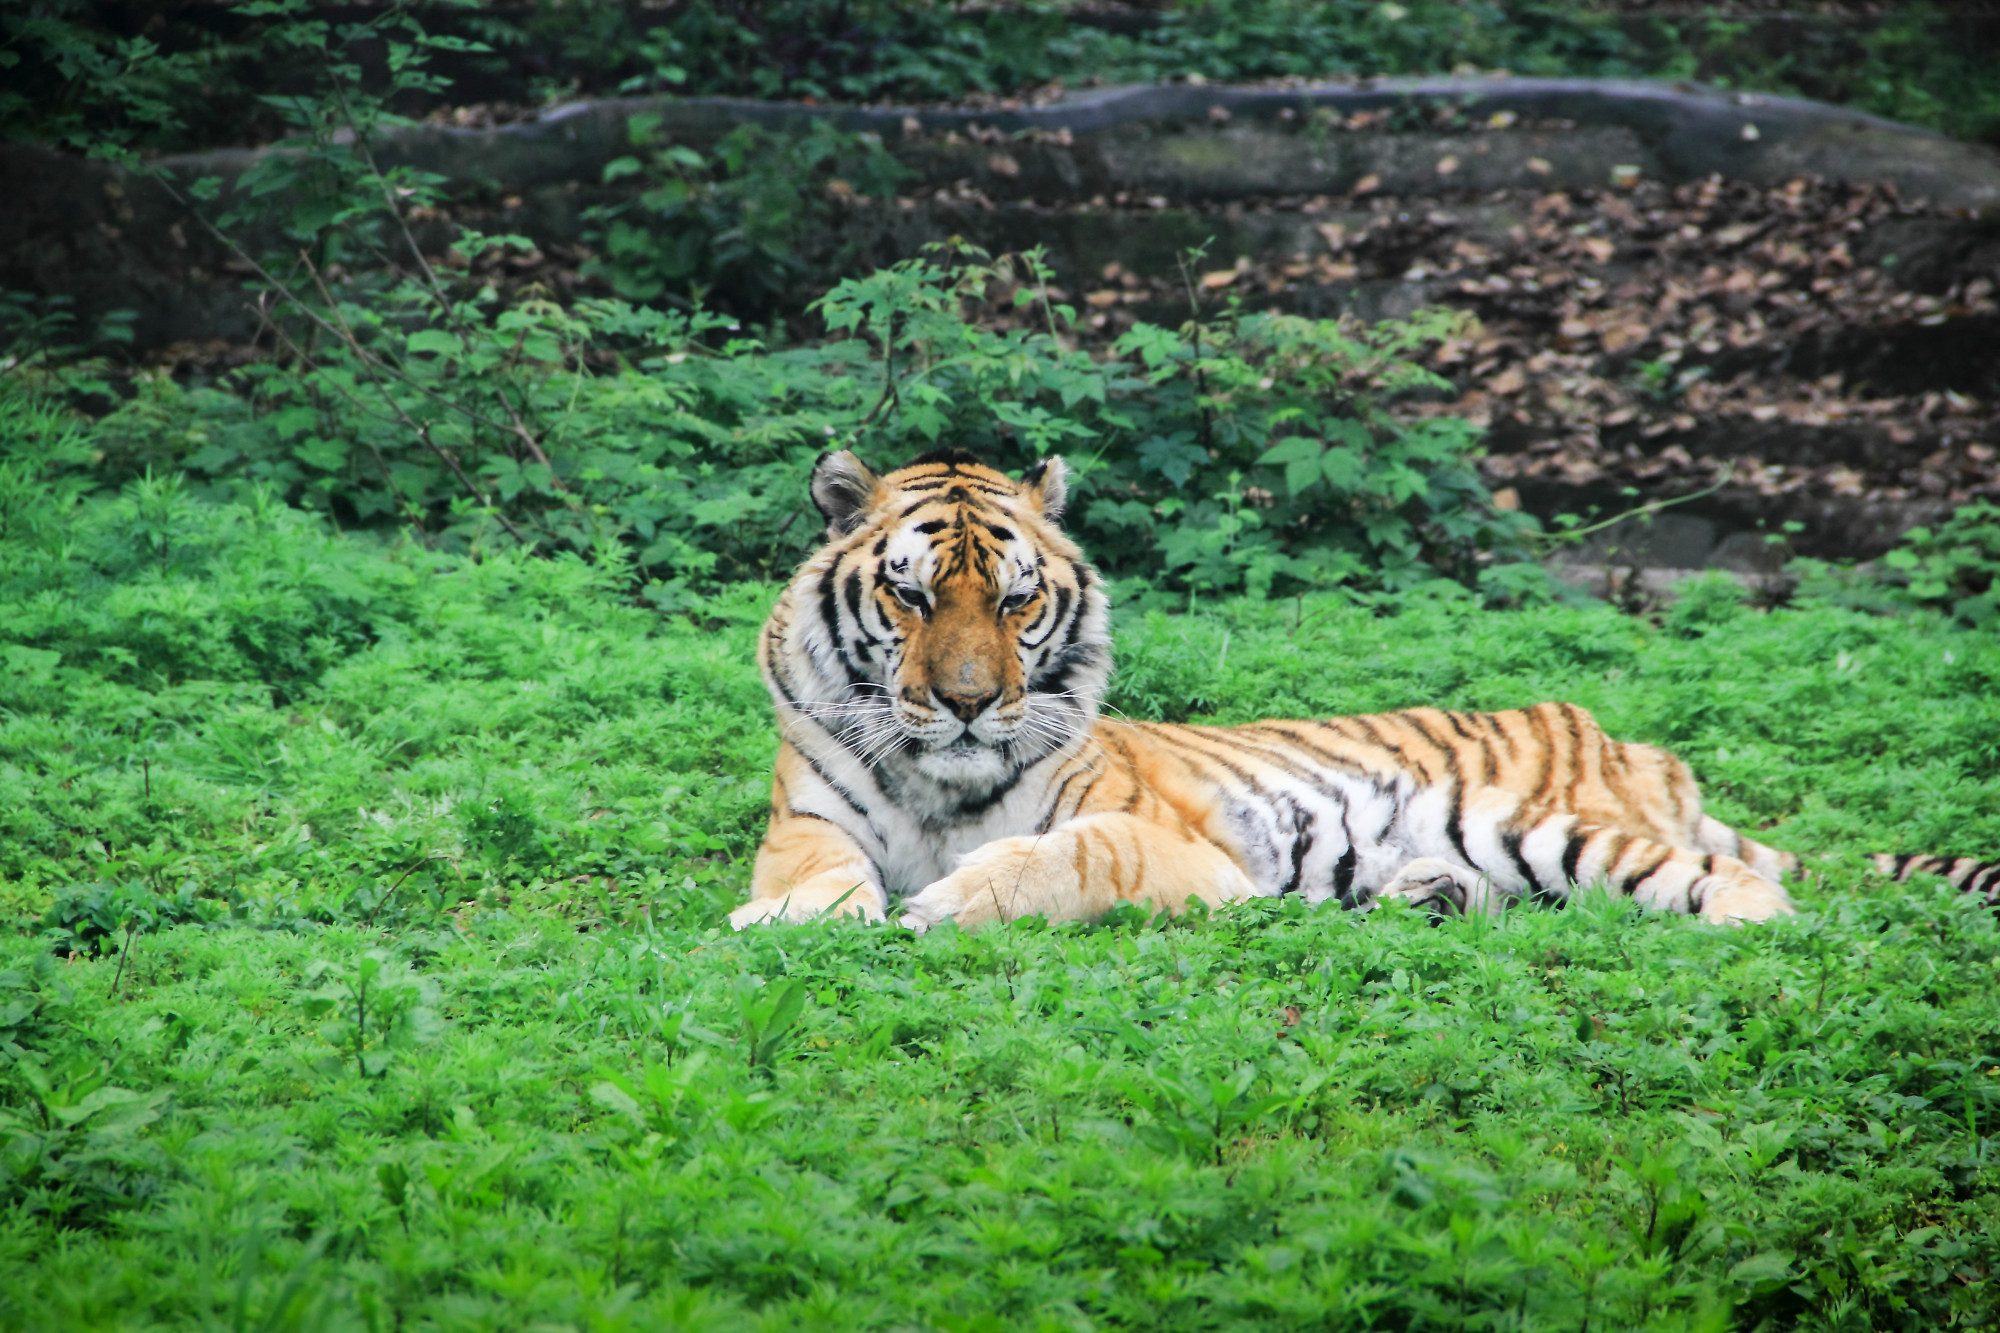 A century ago there were 100,000 wild tigers in Asia, today only between 3,000 and 5,000 remain. Photo: Shutterstock